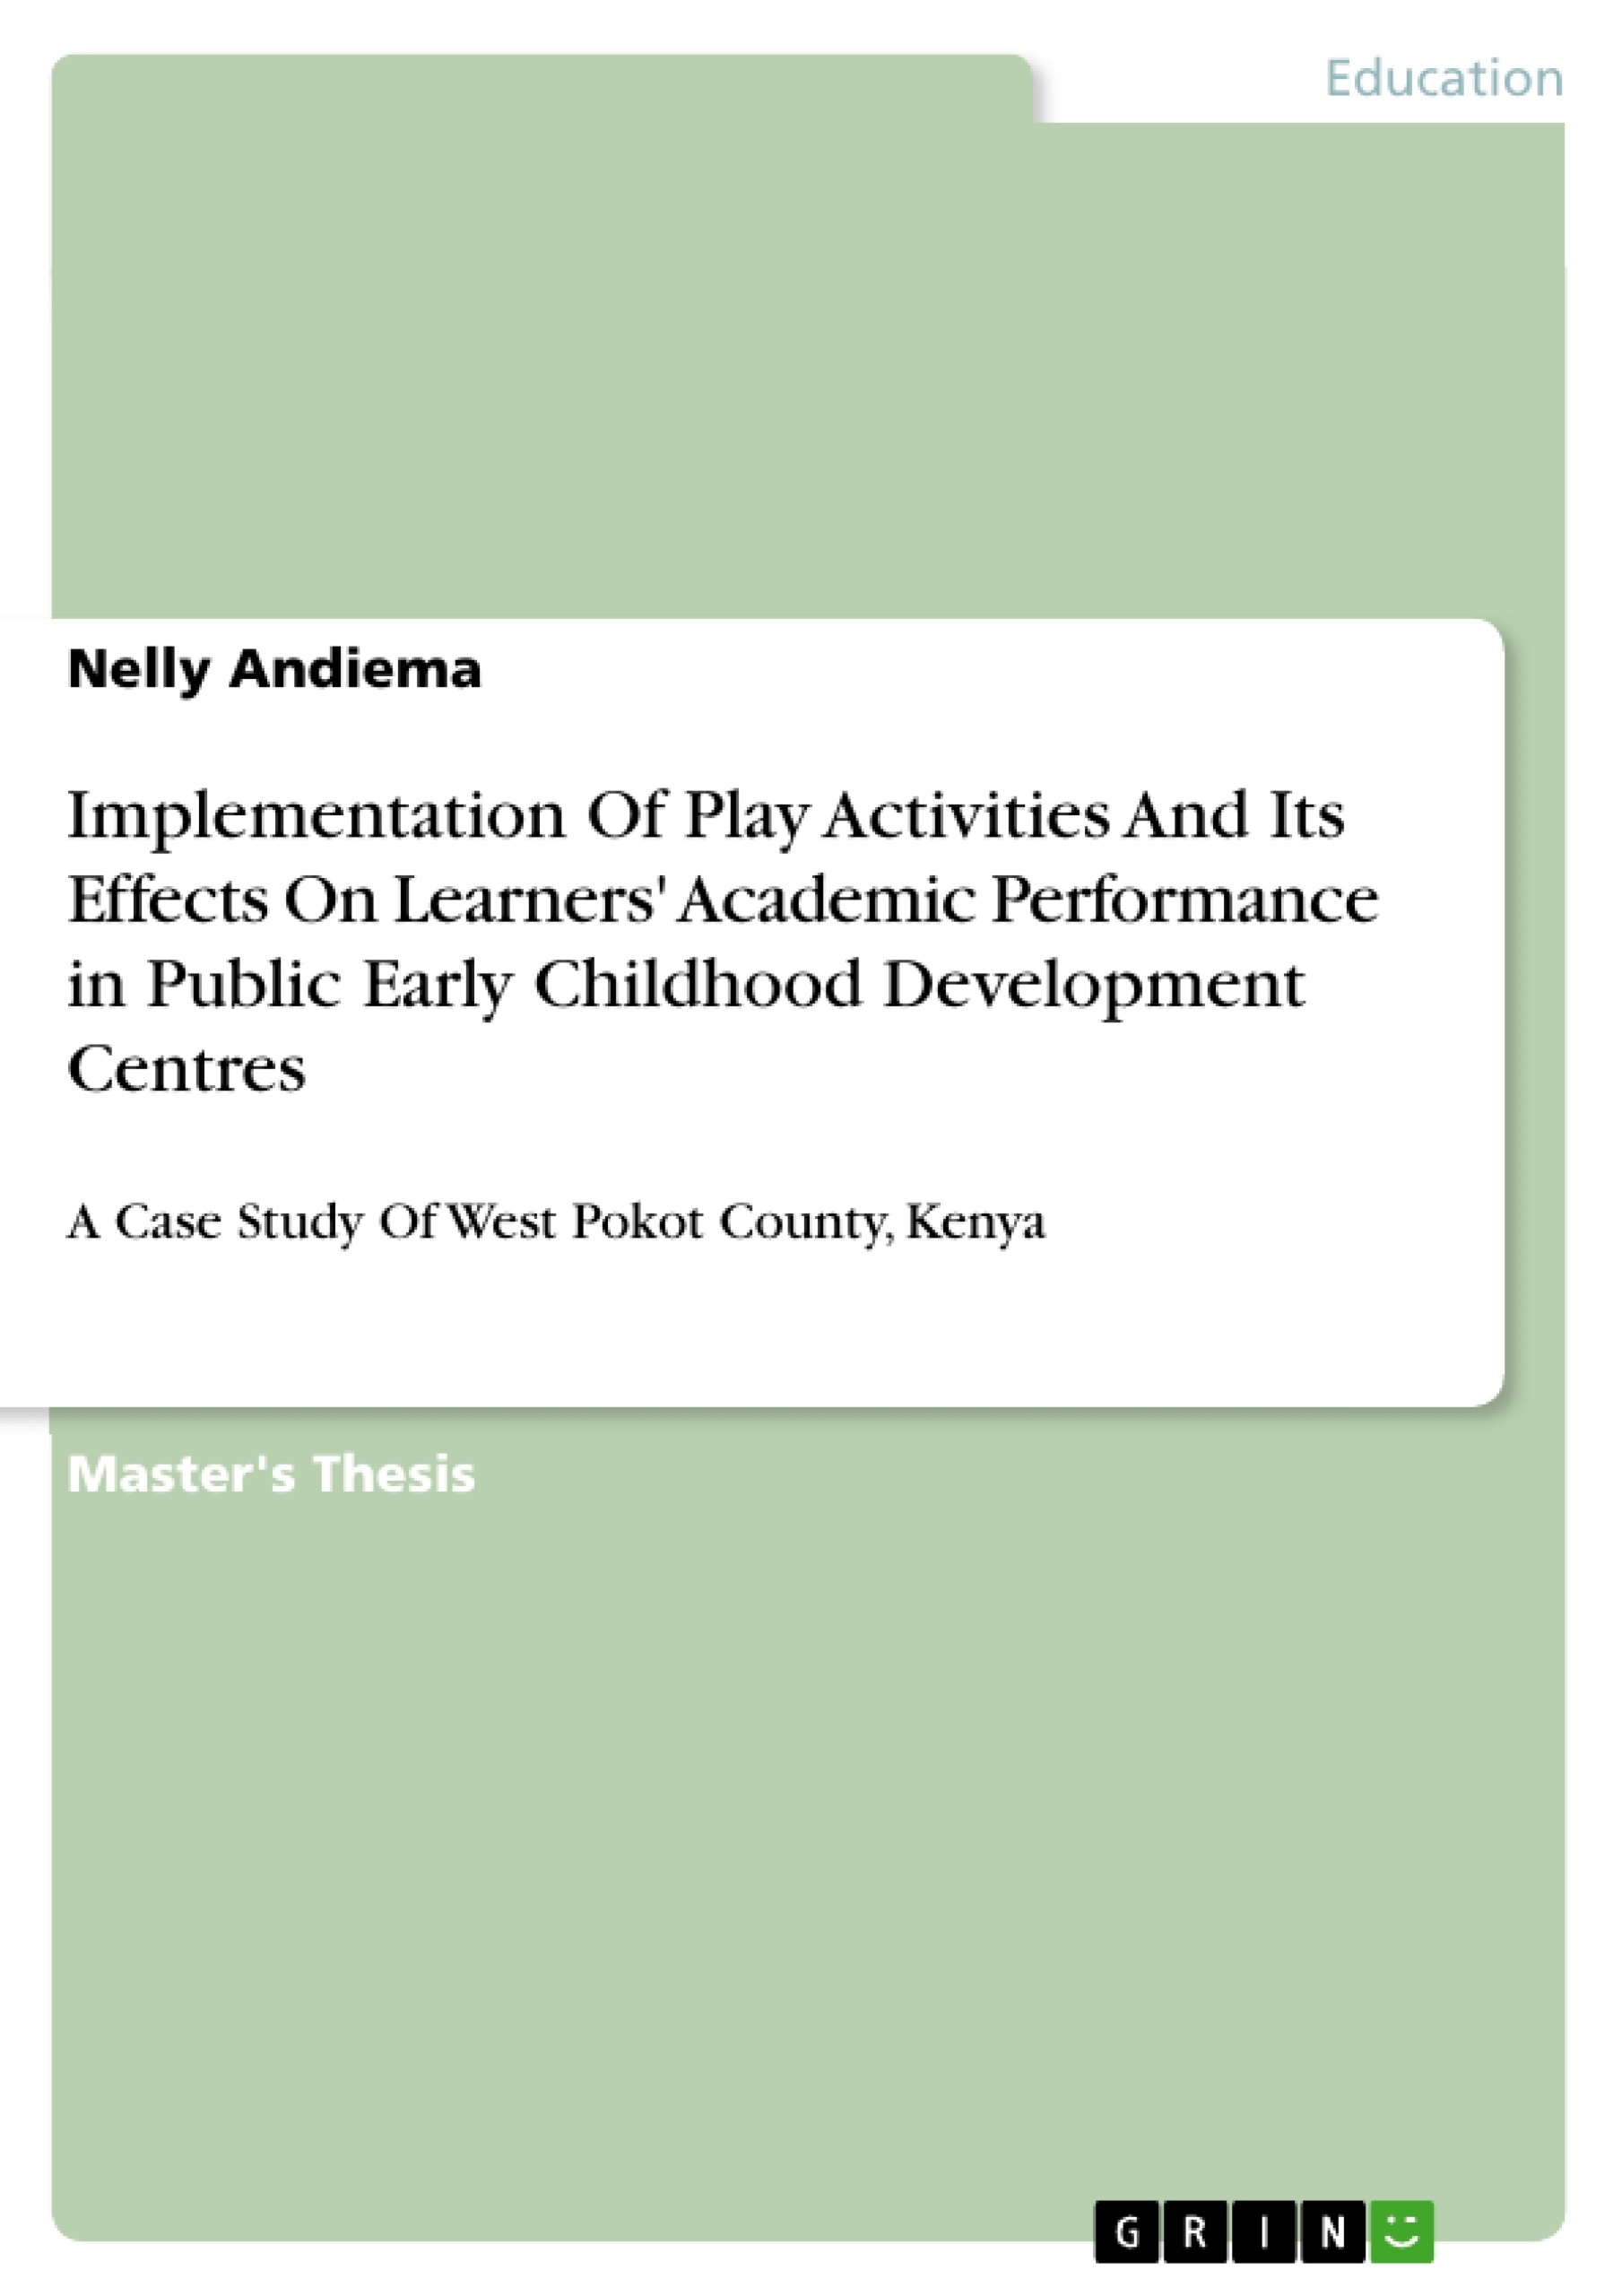 Título: Implementation Of Play Activities And Its Effects On Learners' Academic Performance in Public Early Childhood Development Centres